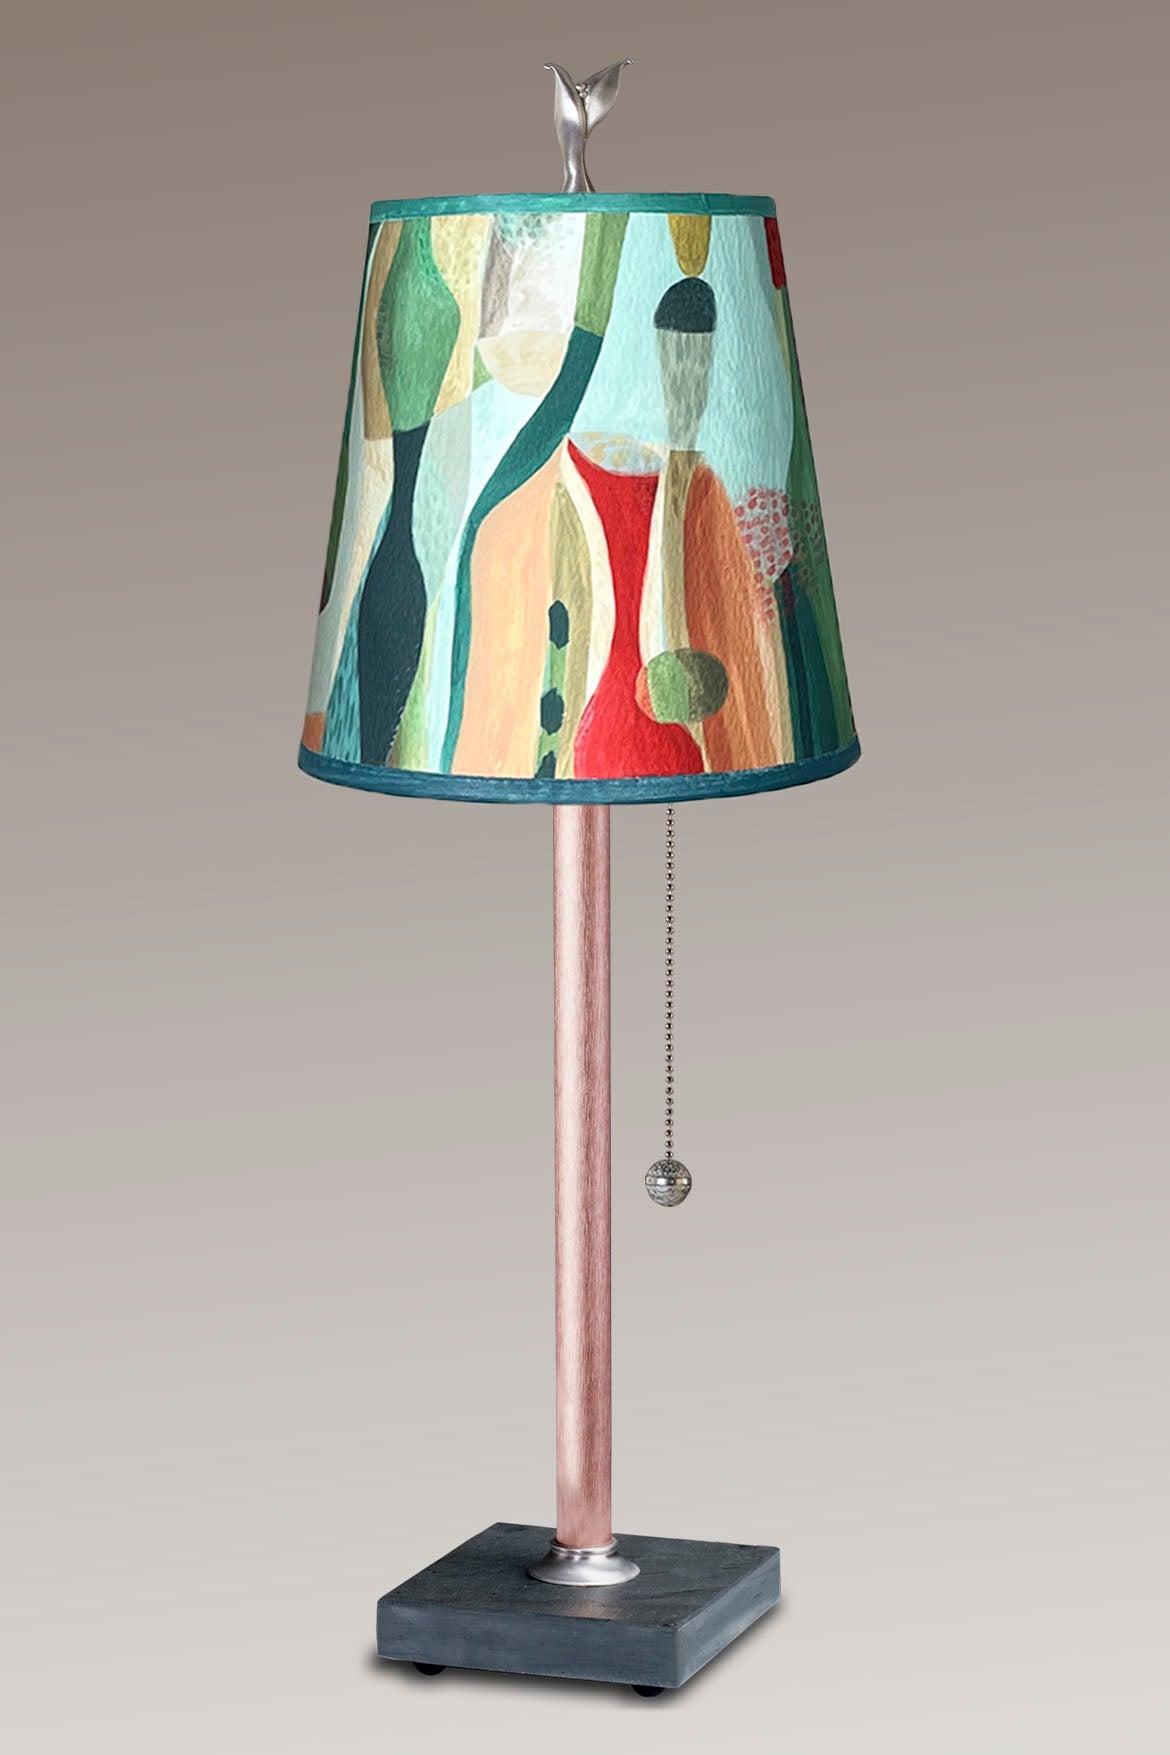 Janna Ugone &amp; Co Table Lamp Copper Table Lamp with Small Drum Shade in Riviera in Poppy